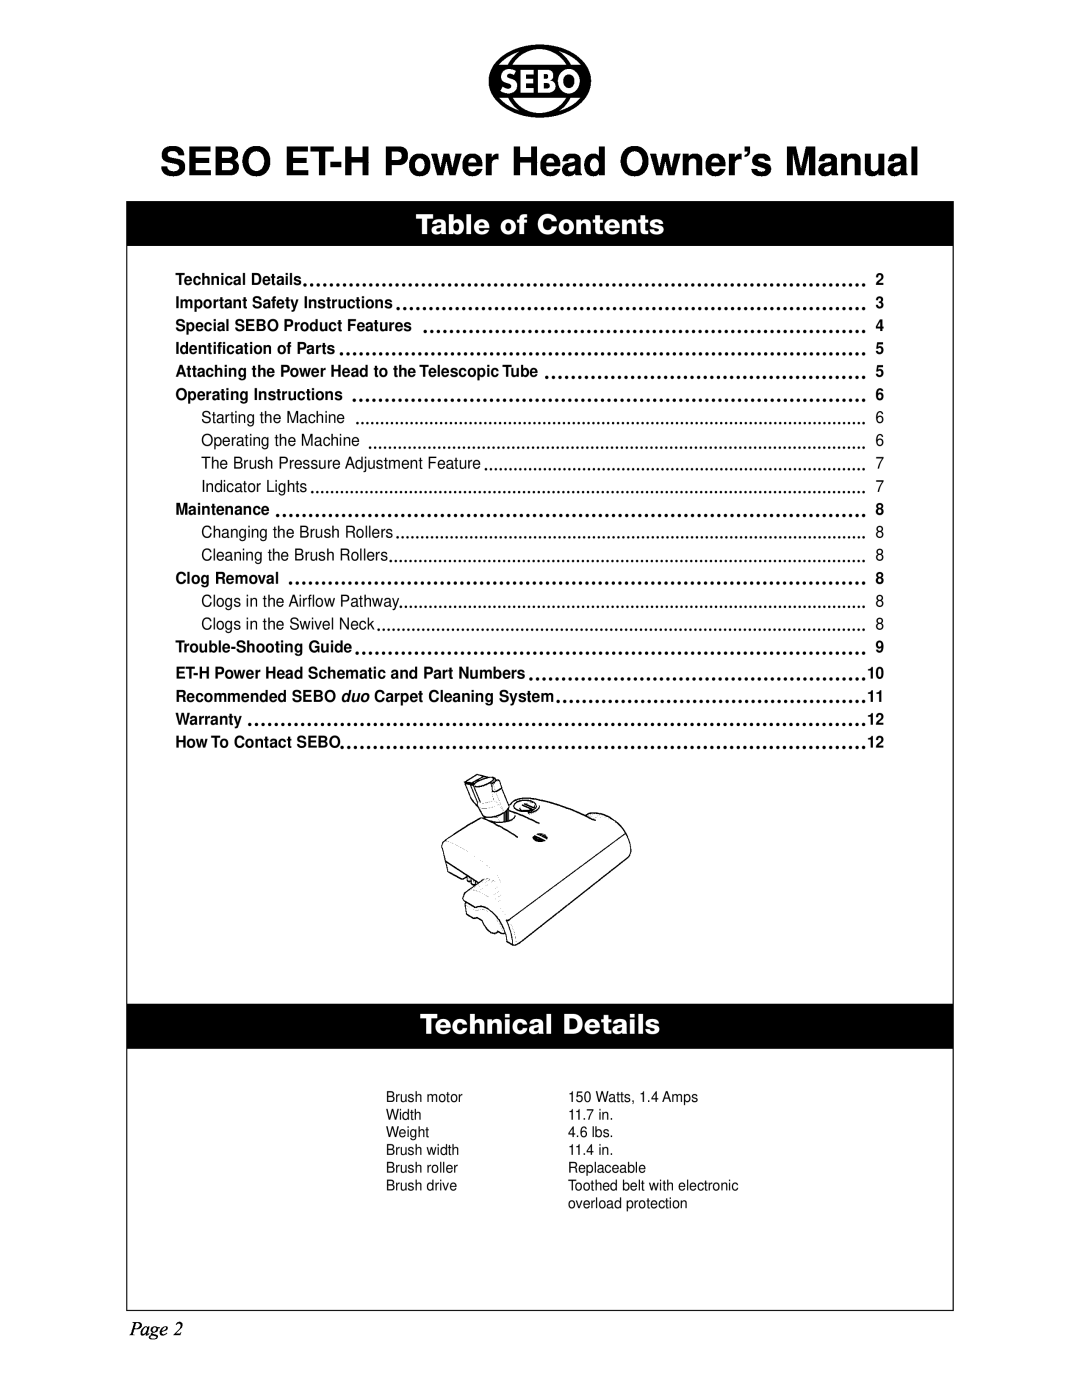 Sebo manual Table of Contents, Technical Details, Page, SEBO ET-H Power Head Owner’s Manual 